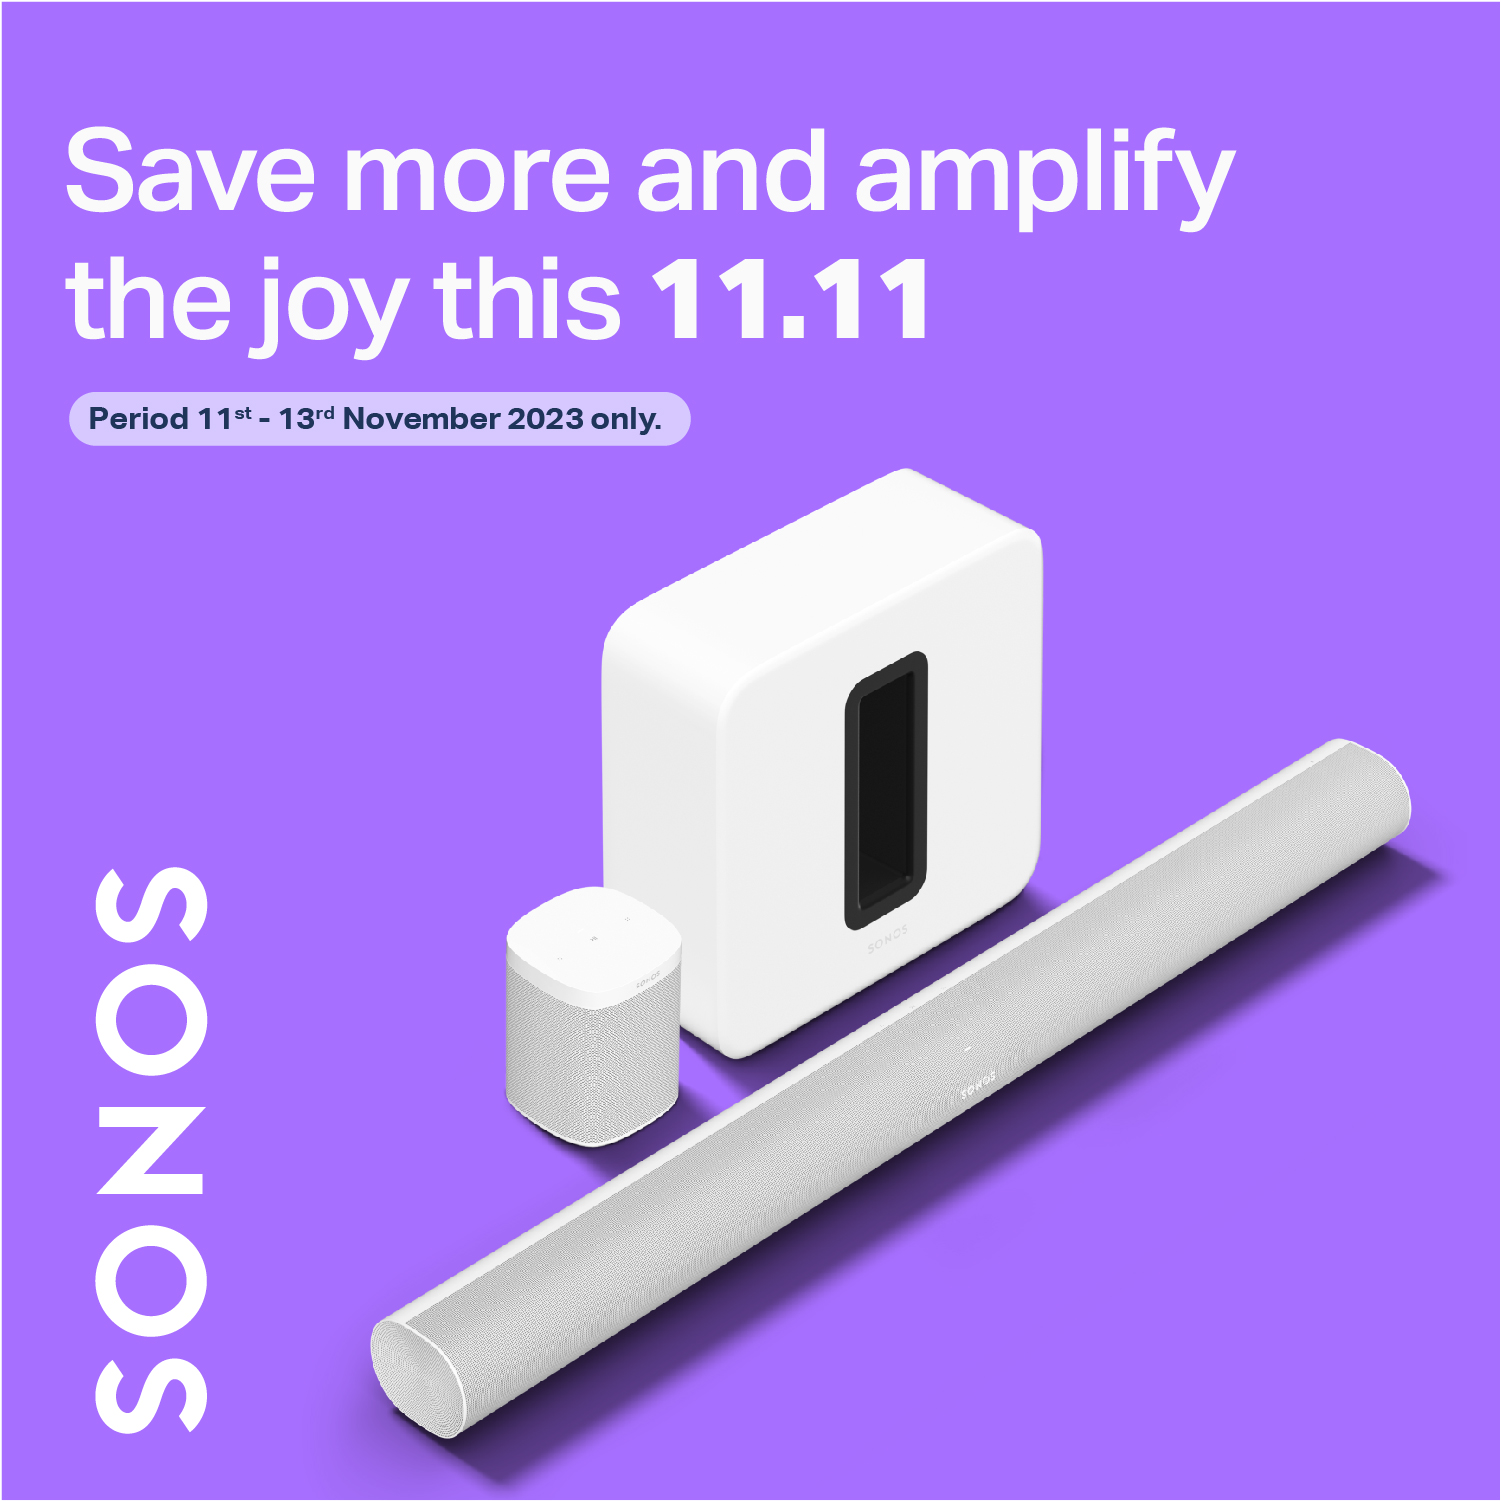 Limited Attractive Offer from Sonos